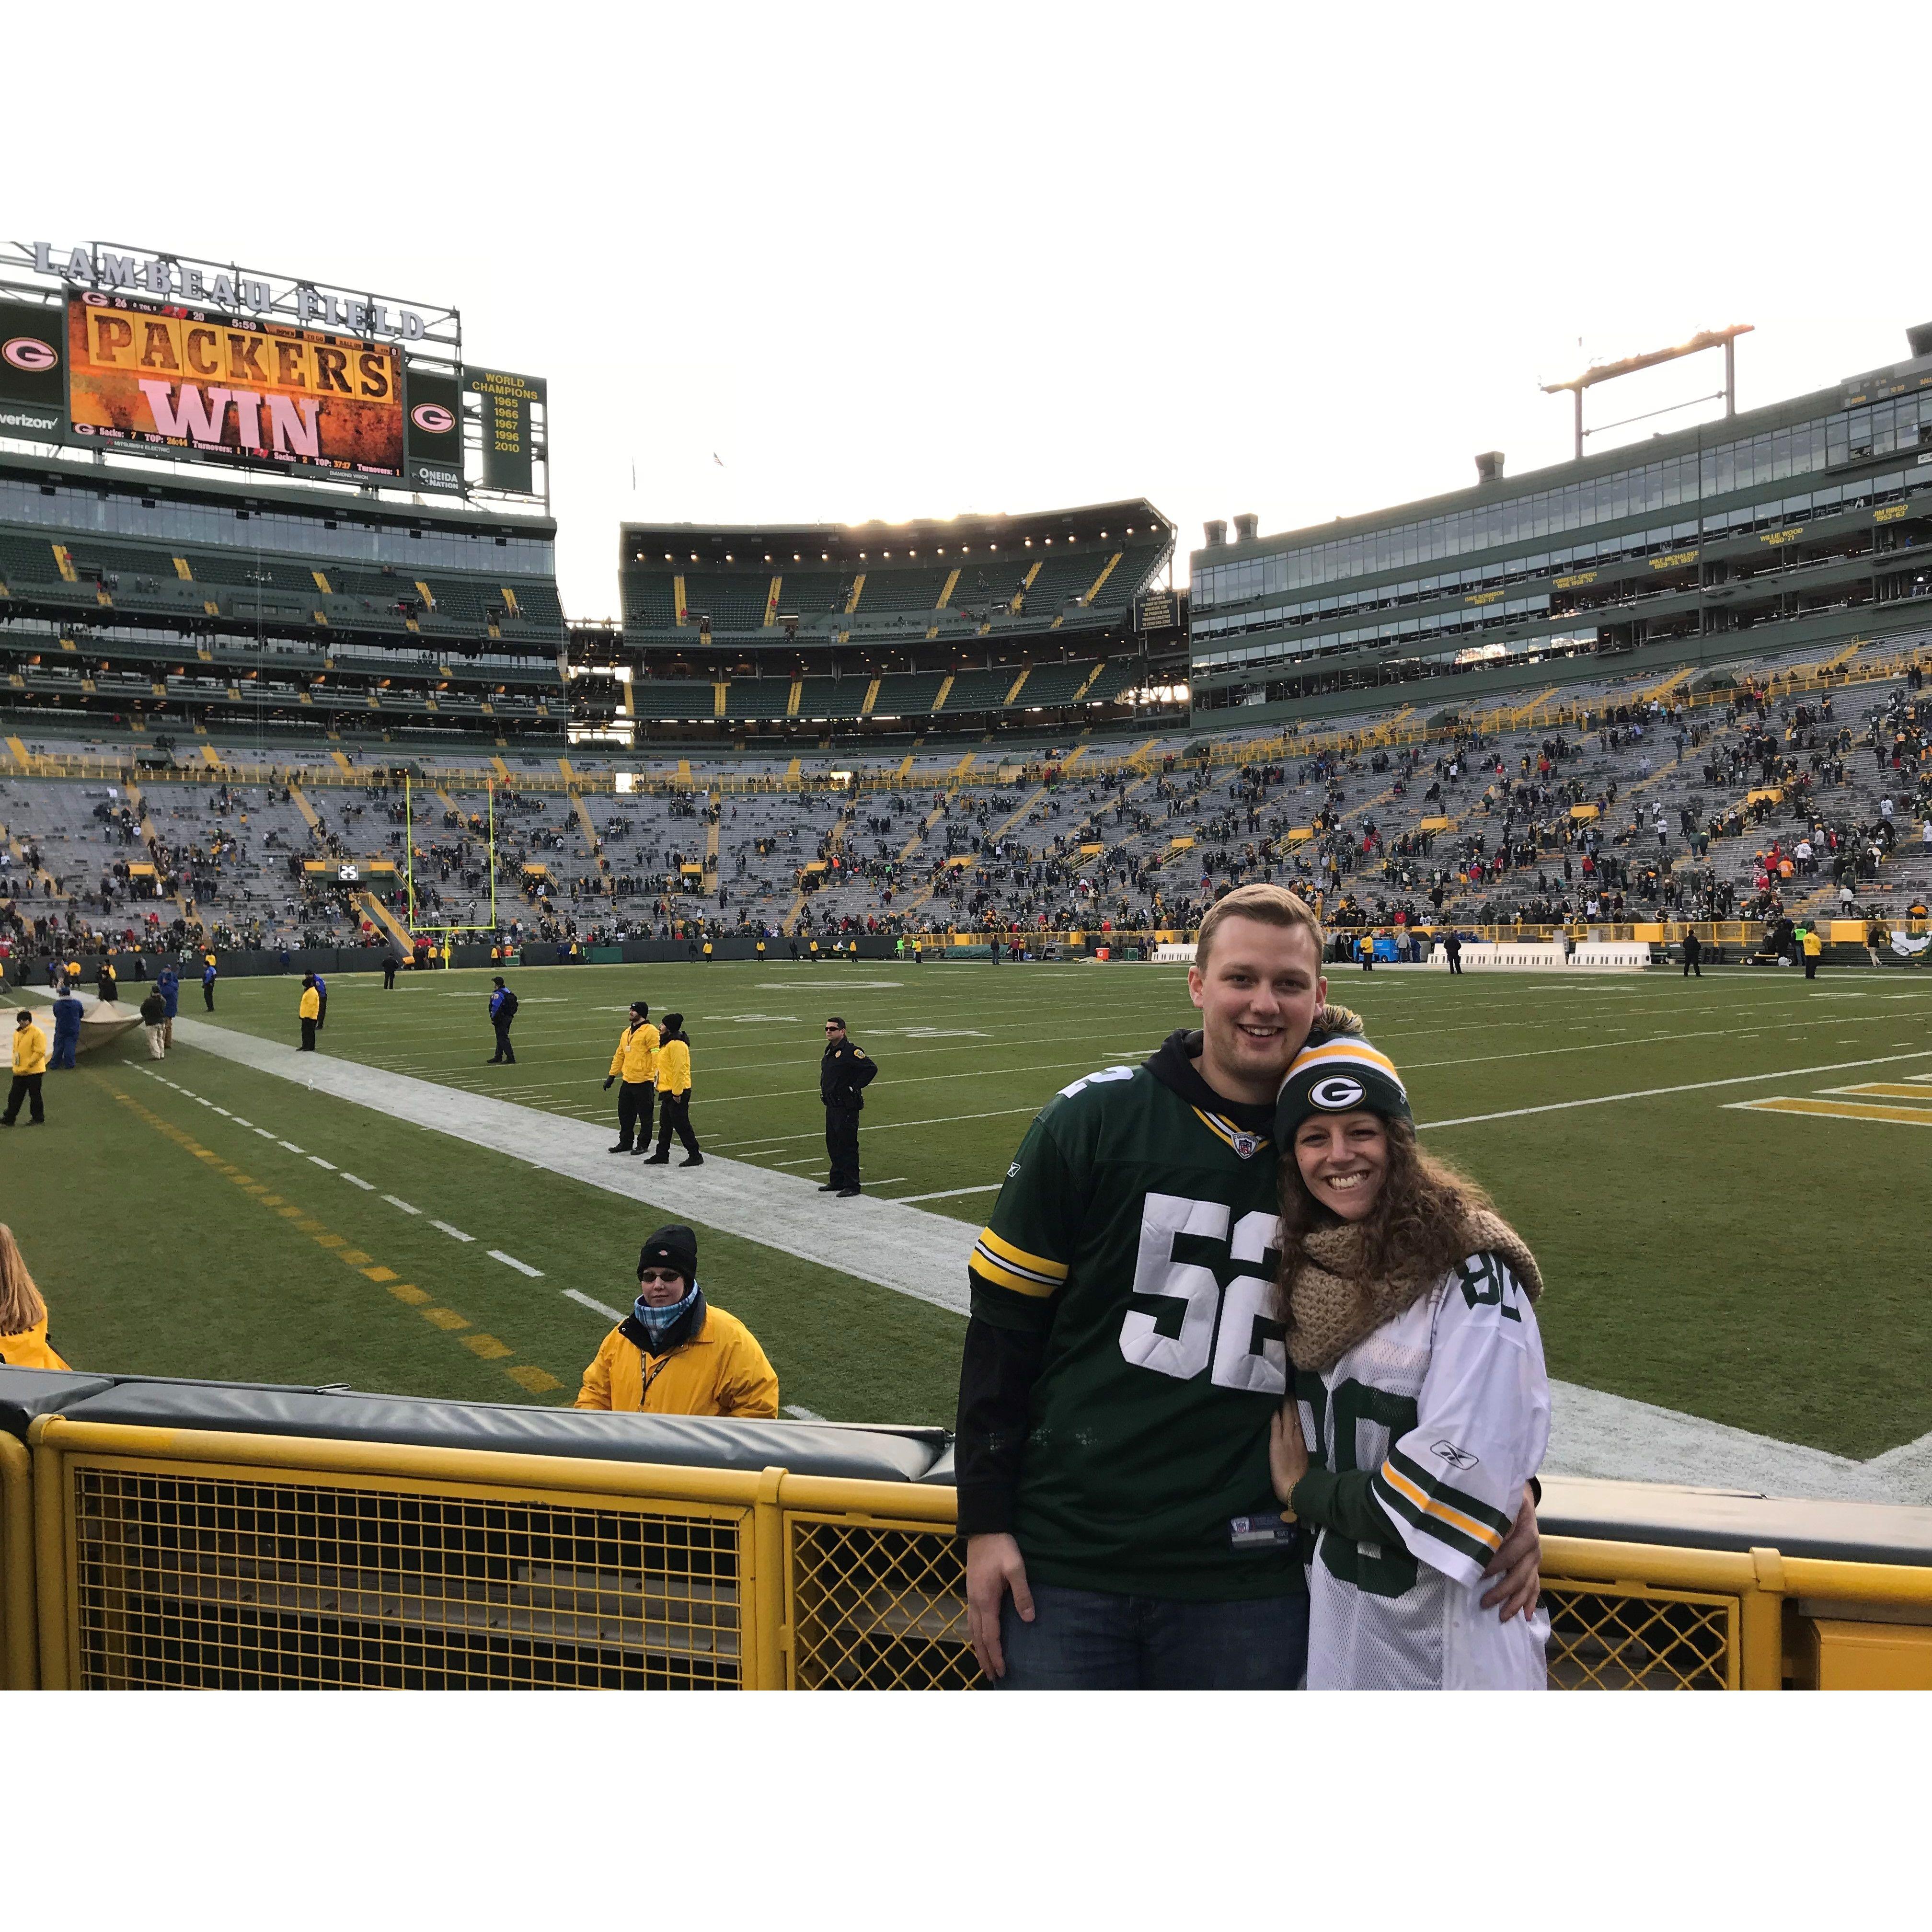 Our 1st Packers game together - Packers win!!